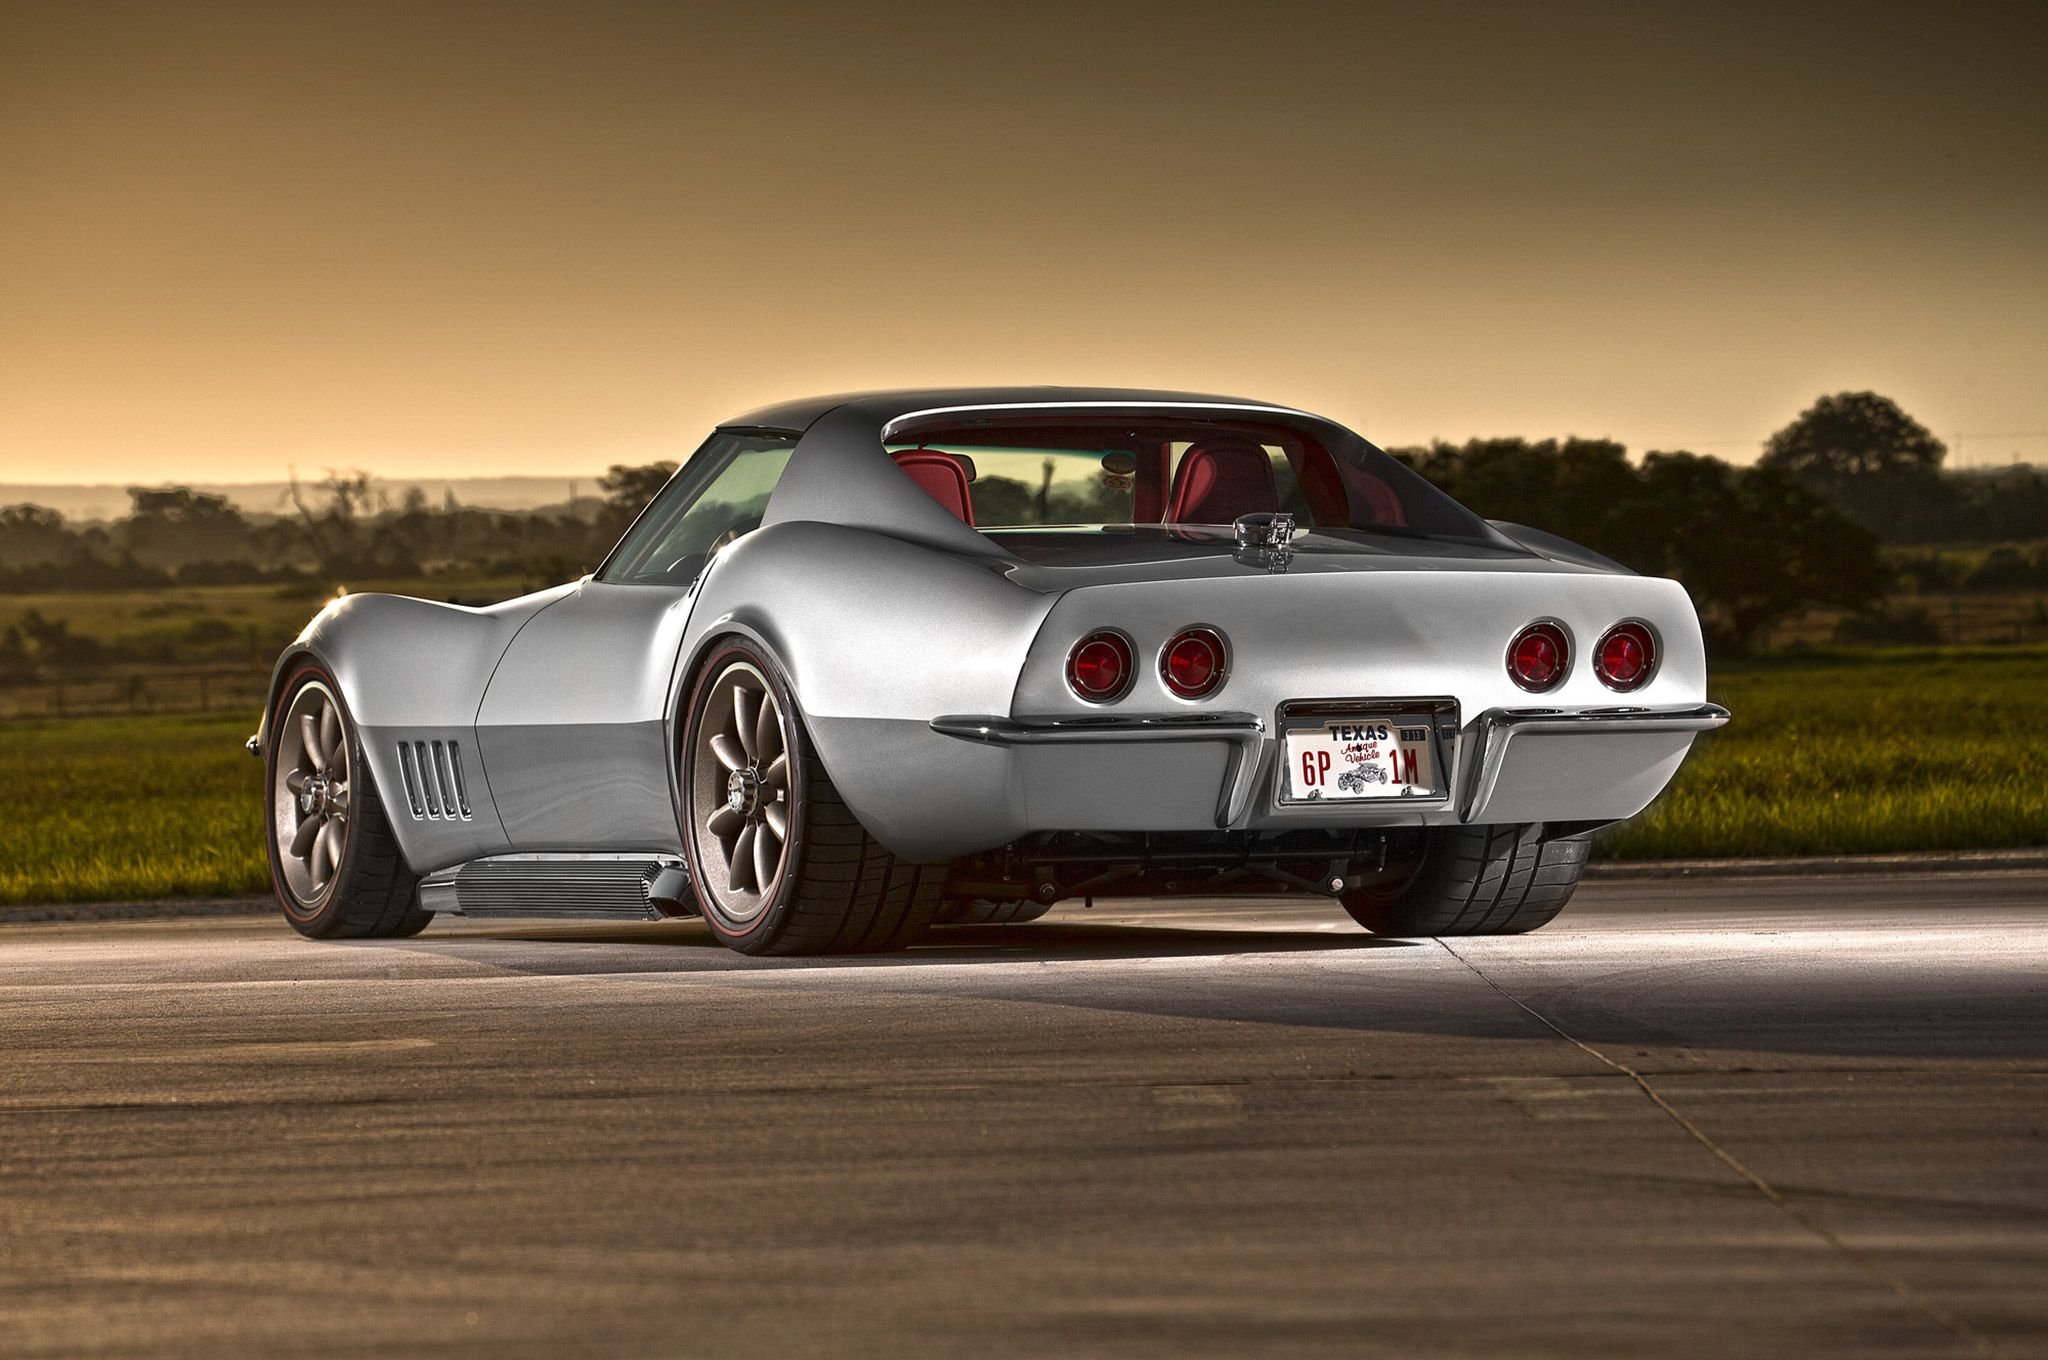 Free Download Touring 1968 Chevrolet Chevy Corvette Coupe C3 Wallpaper Background 48x1360 For Your Desktop Mobile Tablet Explore 49 Corvette C3 Wallpaper Vette Wallpaper 16 Corvette Wallpaper Corvette Pictures Wallpaper